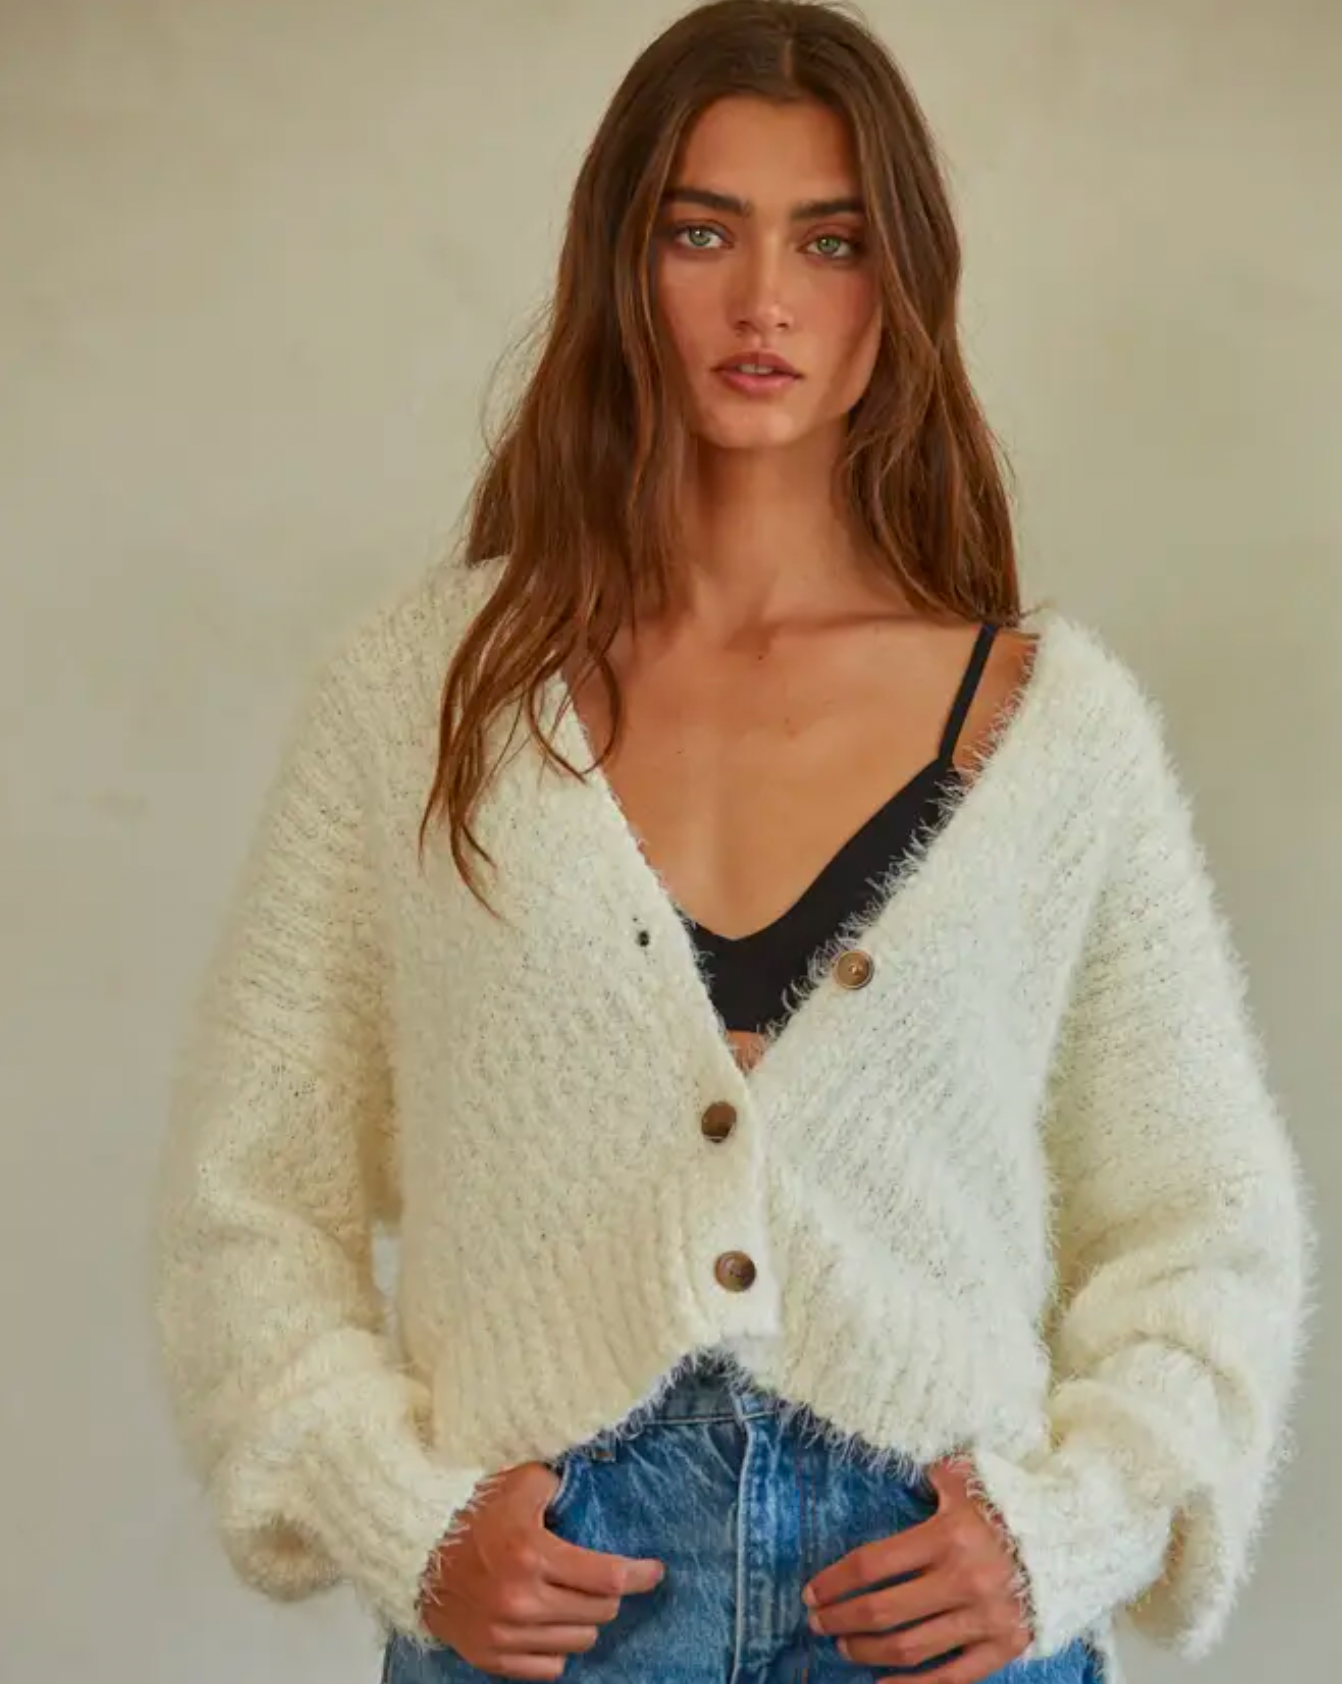 Model Wearing By Together The Brielle Cozy Cardigan wearing jeans and a black bra on a off white background